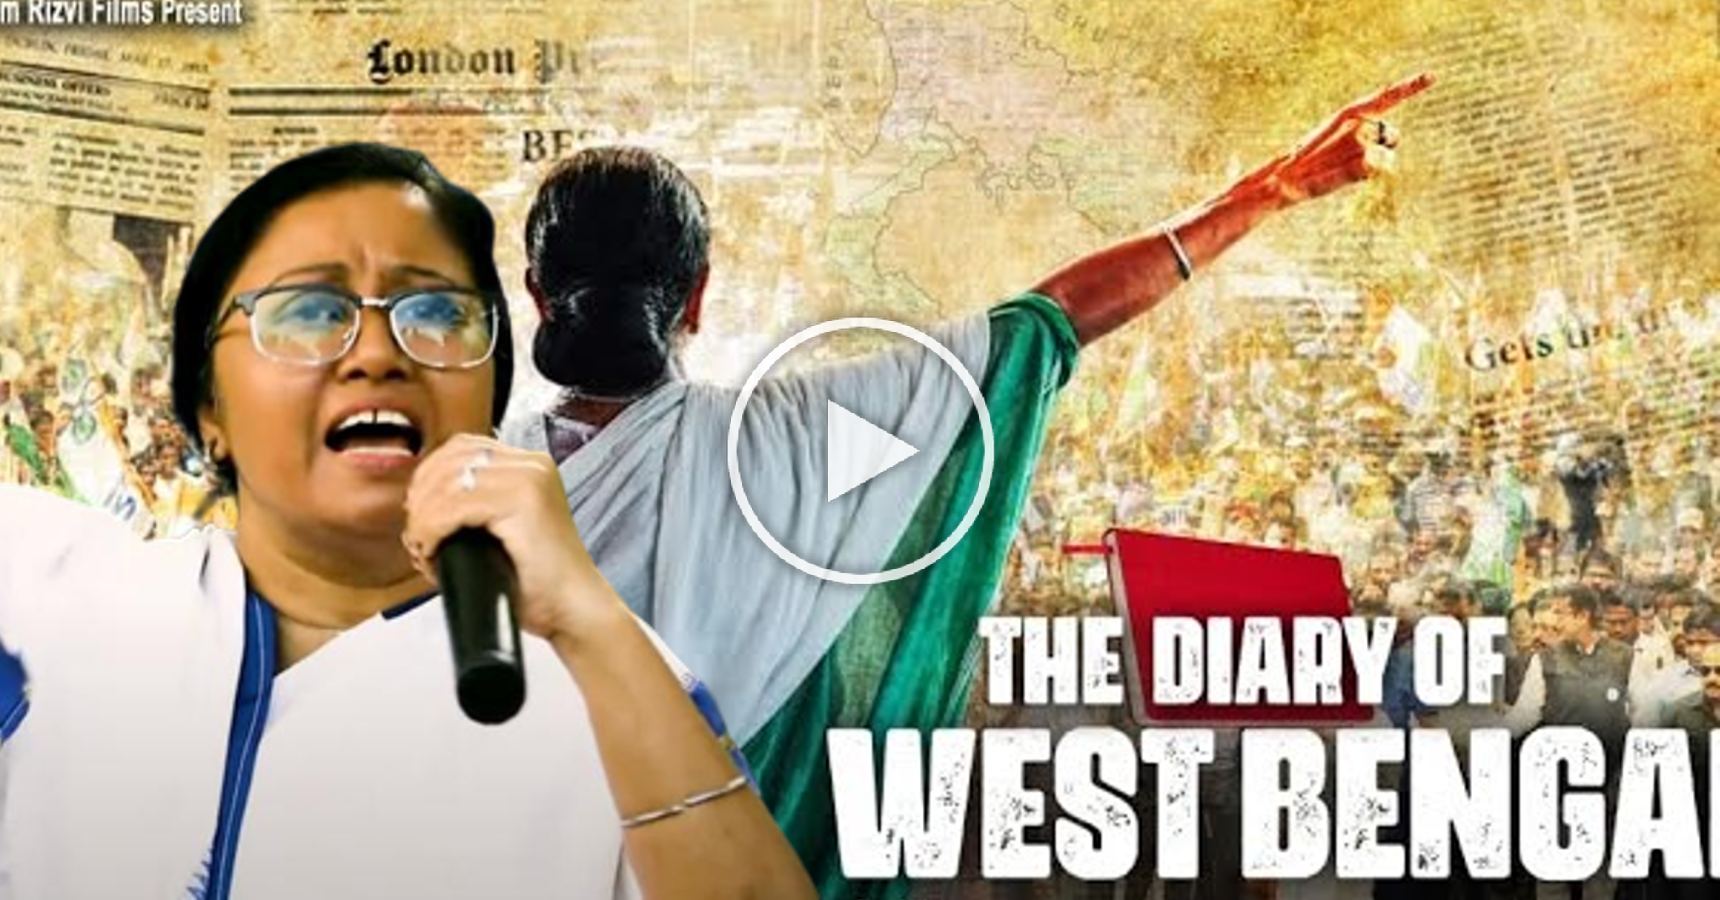 The Diary of West Bengal movie trailer released